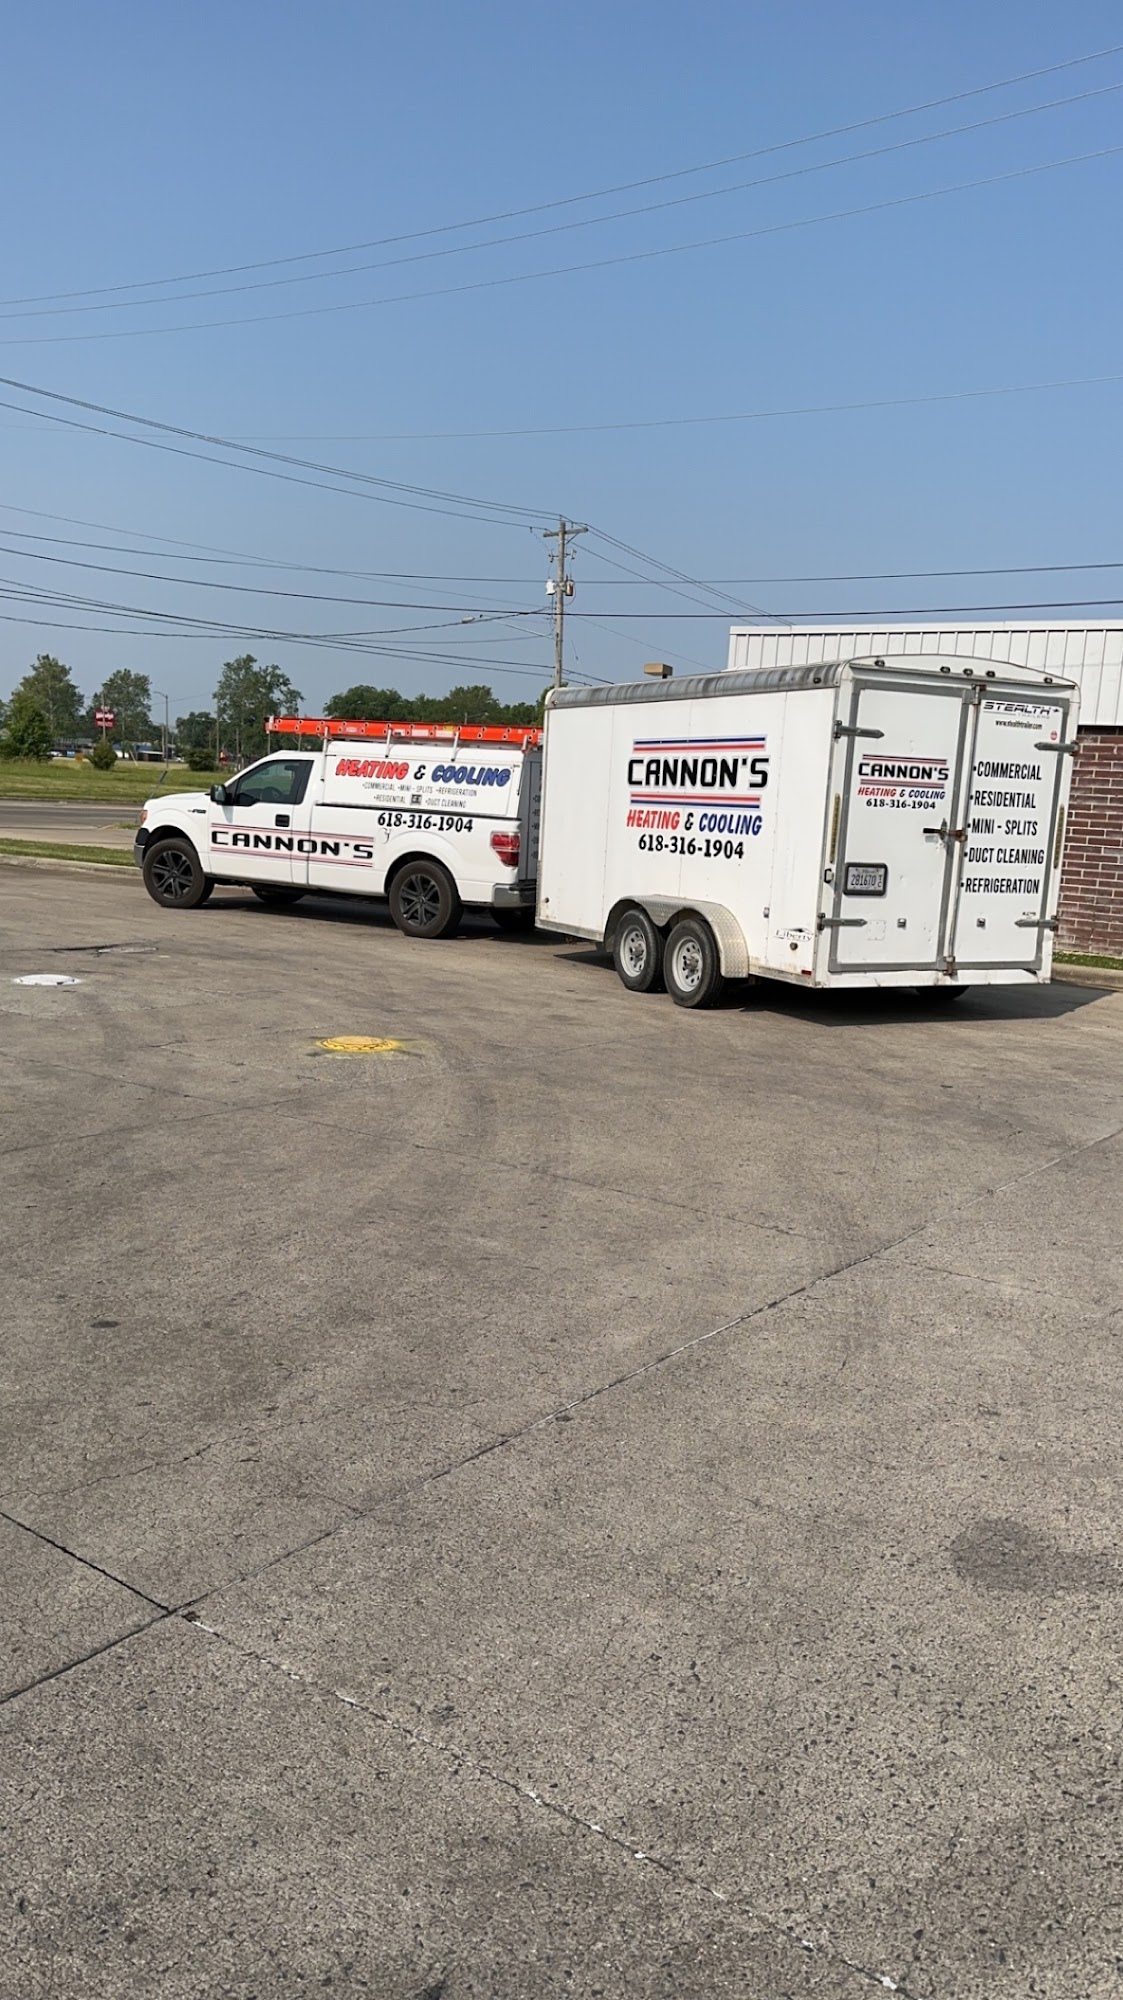 CANNON'S HEATING AND COOLING 2261 Colestock Ln, Centralia Illinois 62801